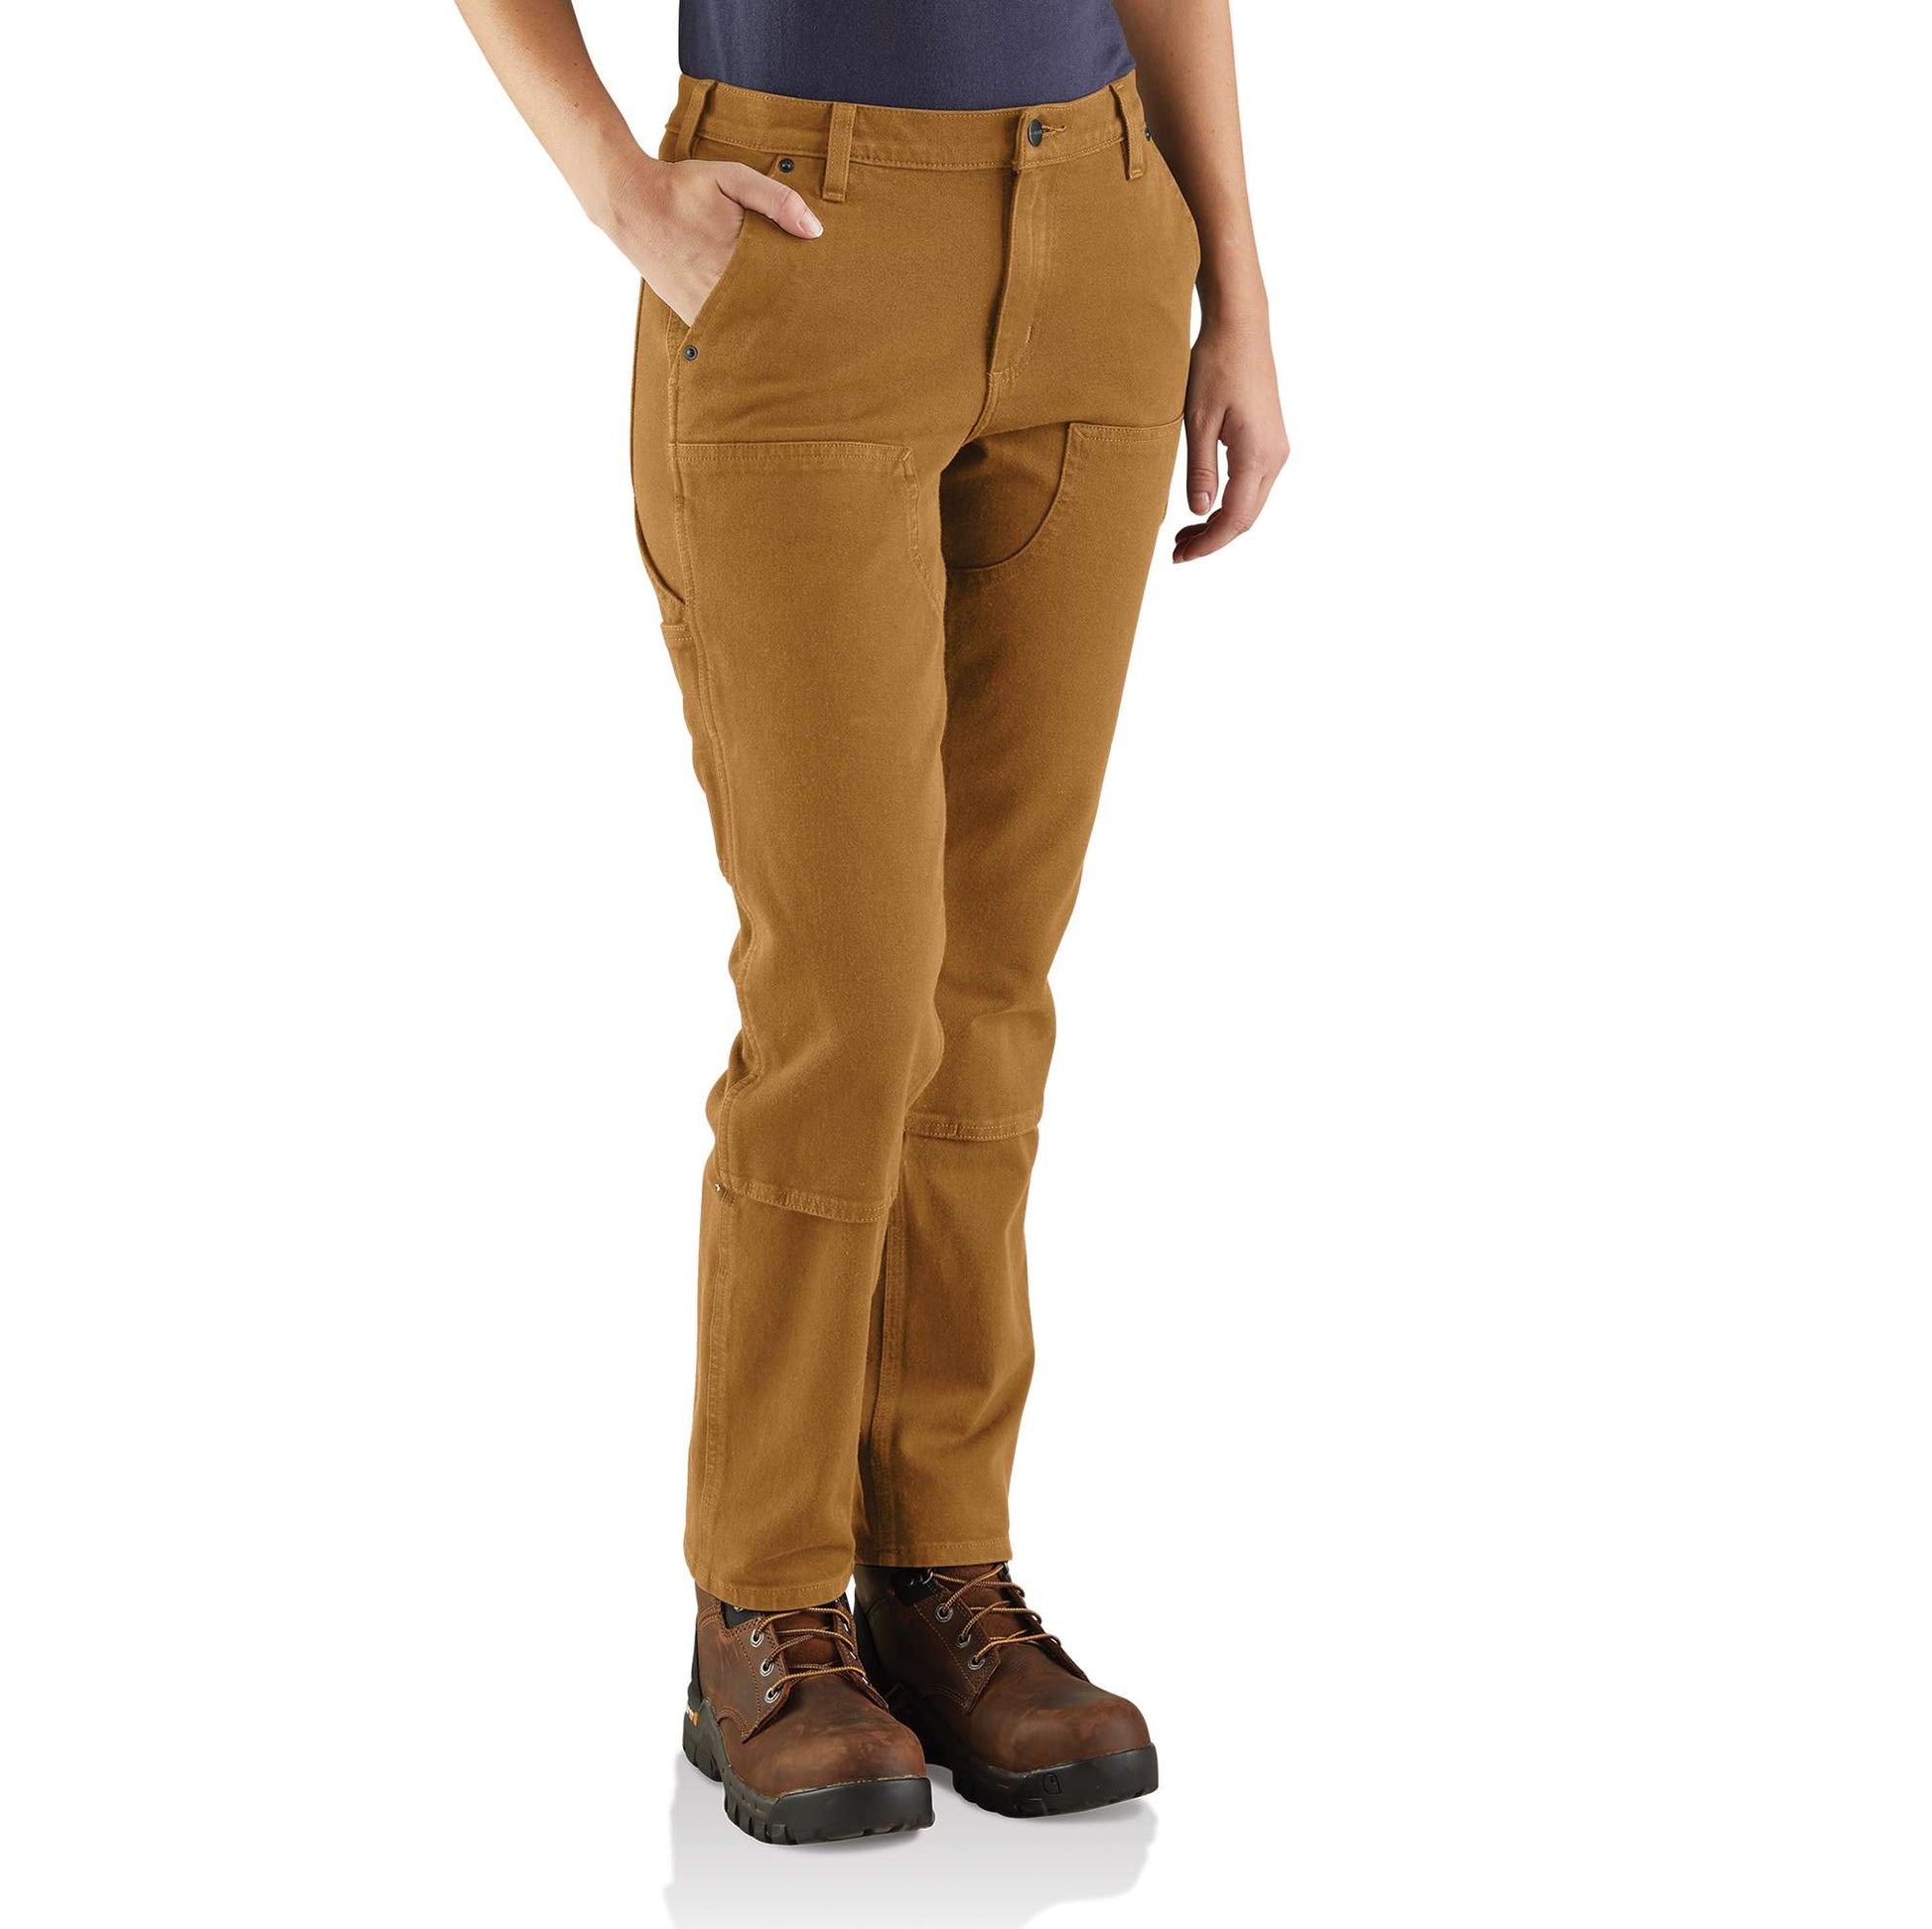 Carhartt Men's Washed Twill Relaxed Fit Work Pants